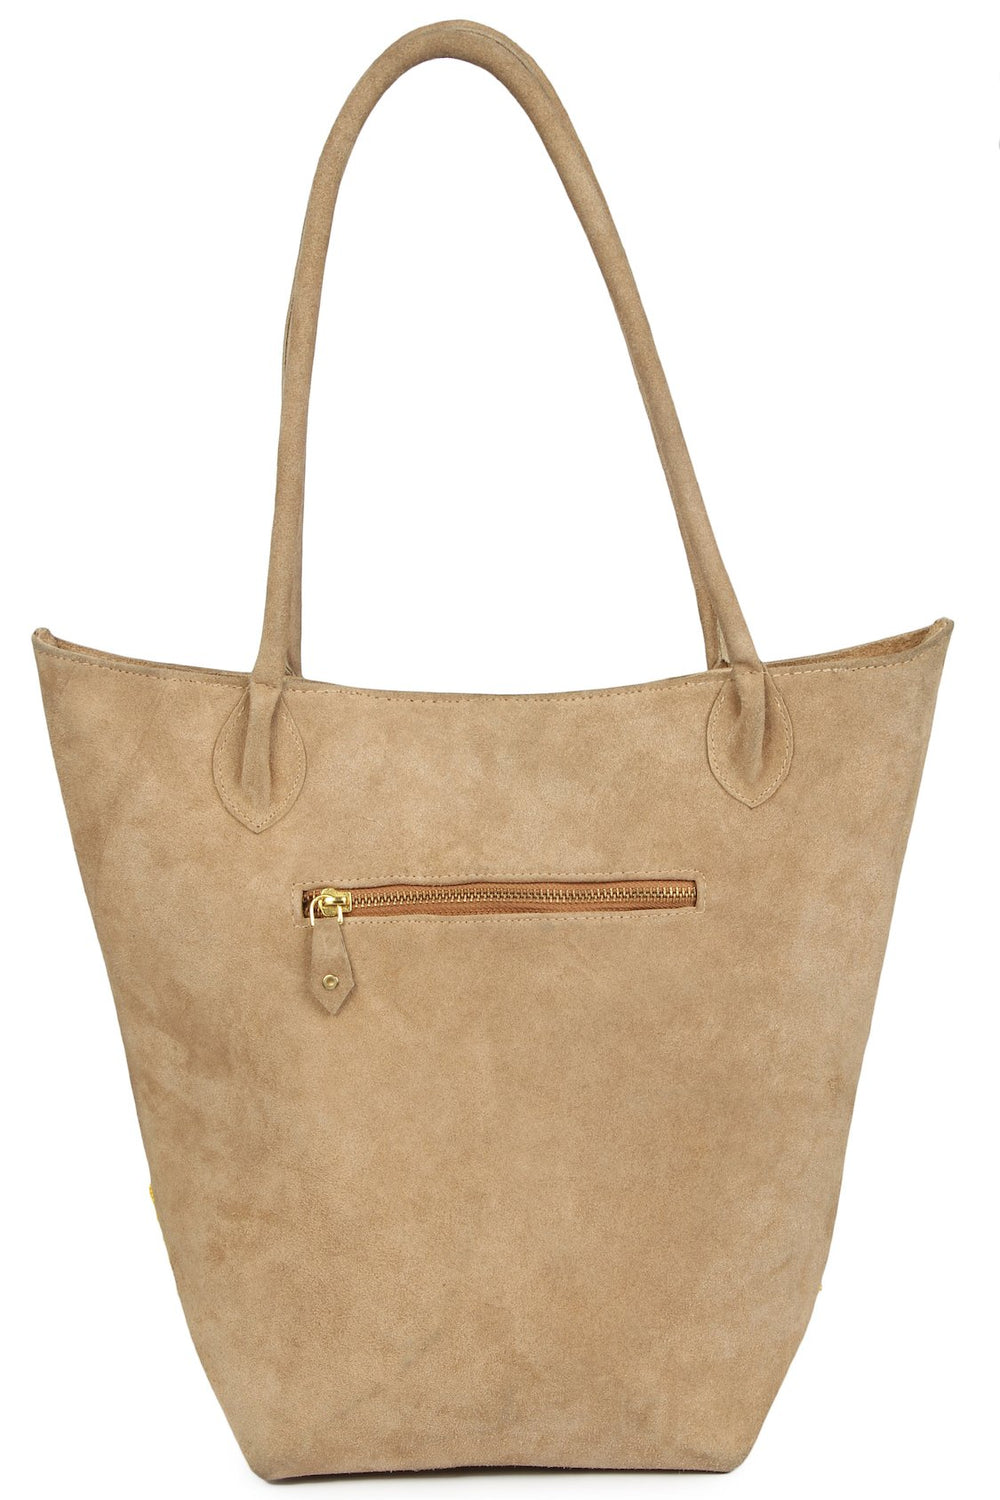 Aaliyah Beige Suede Leather Hand Embroidered Bag